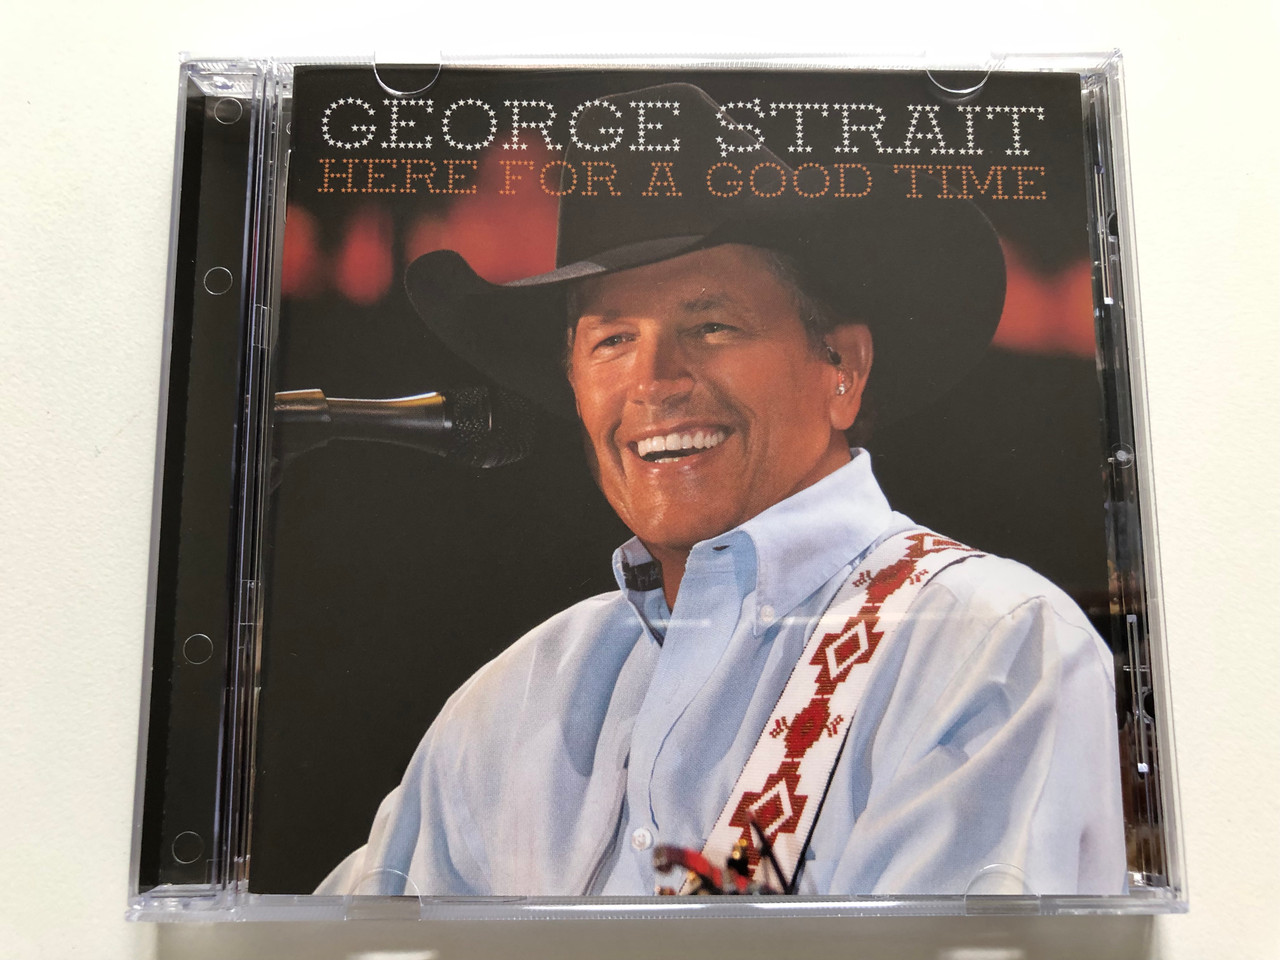 https://cdn10.bigcommerce.com/s-62bdpkt7pb/products/31037/images/182940/George_Strait_Here_For_A_Good_Time_Hump_Head_Records_Audio_CD_2011_HUMP116_1__53573.1624958440.1280.1280.JPG?c=2